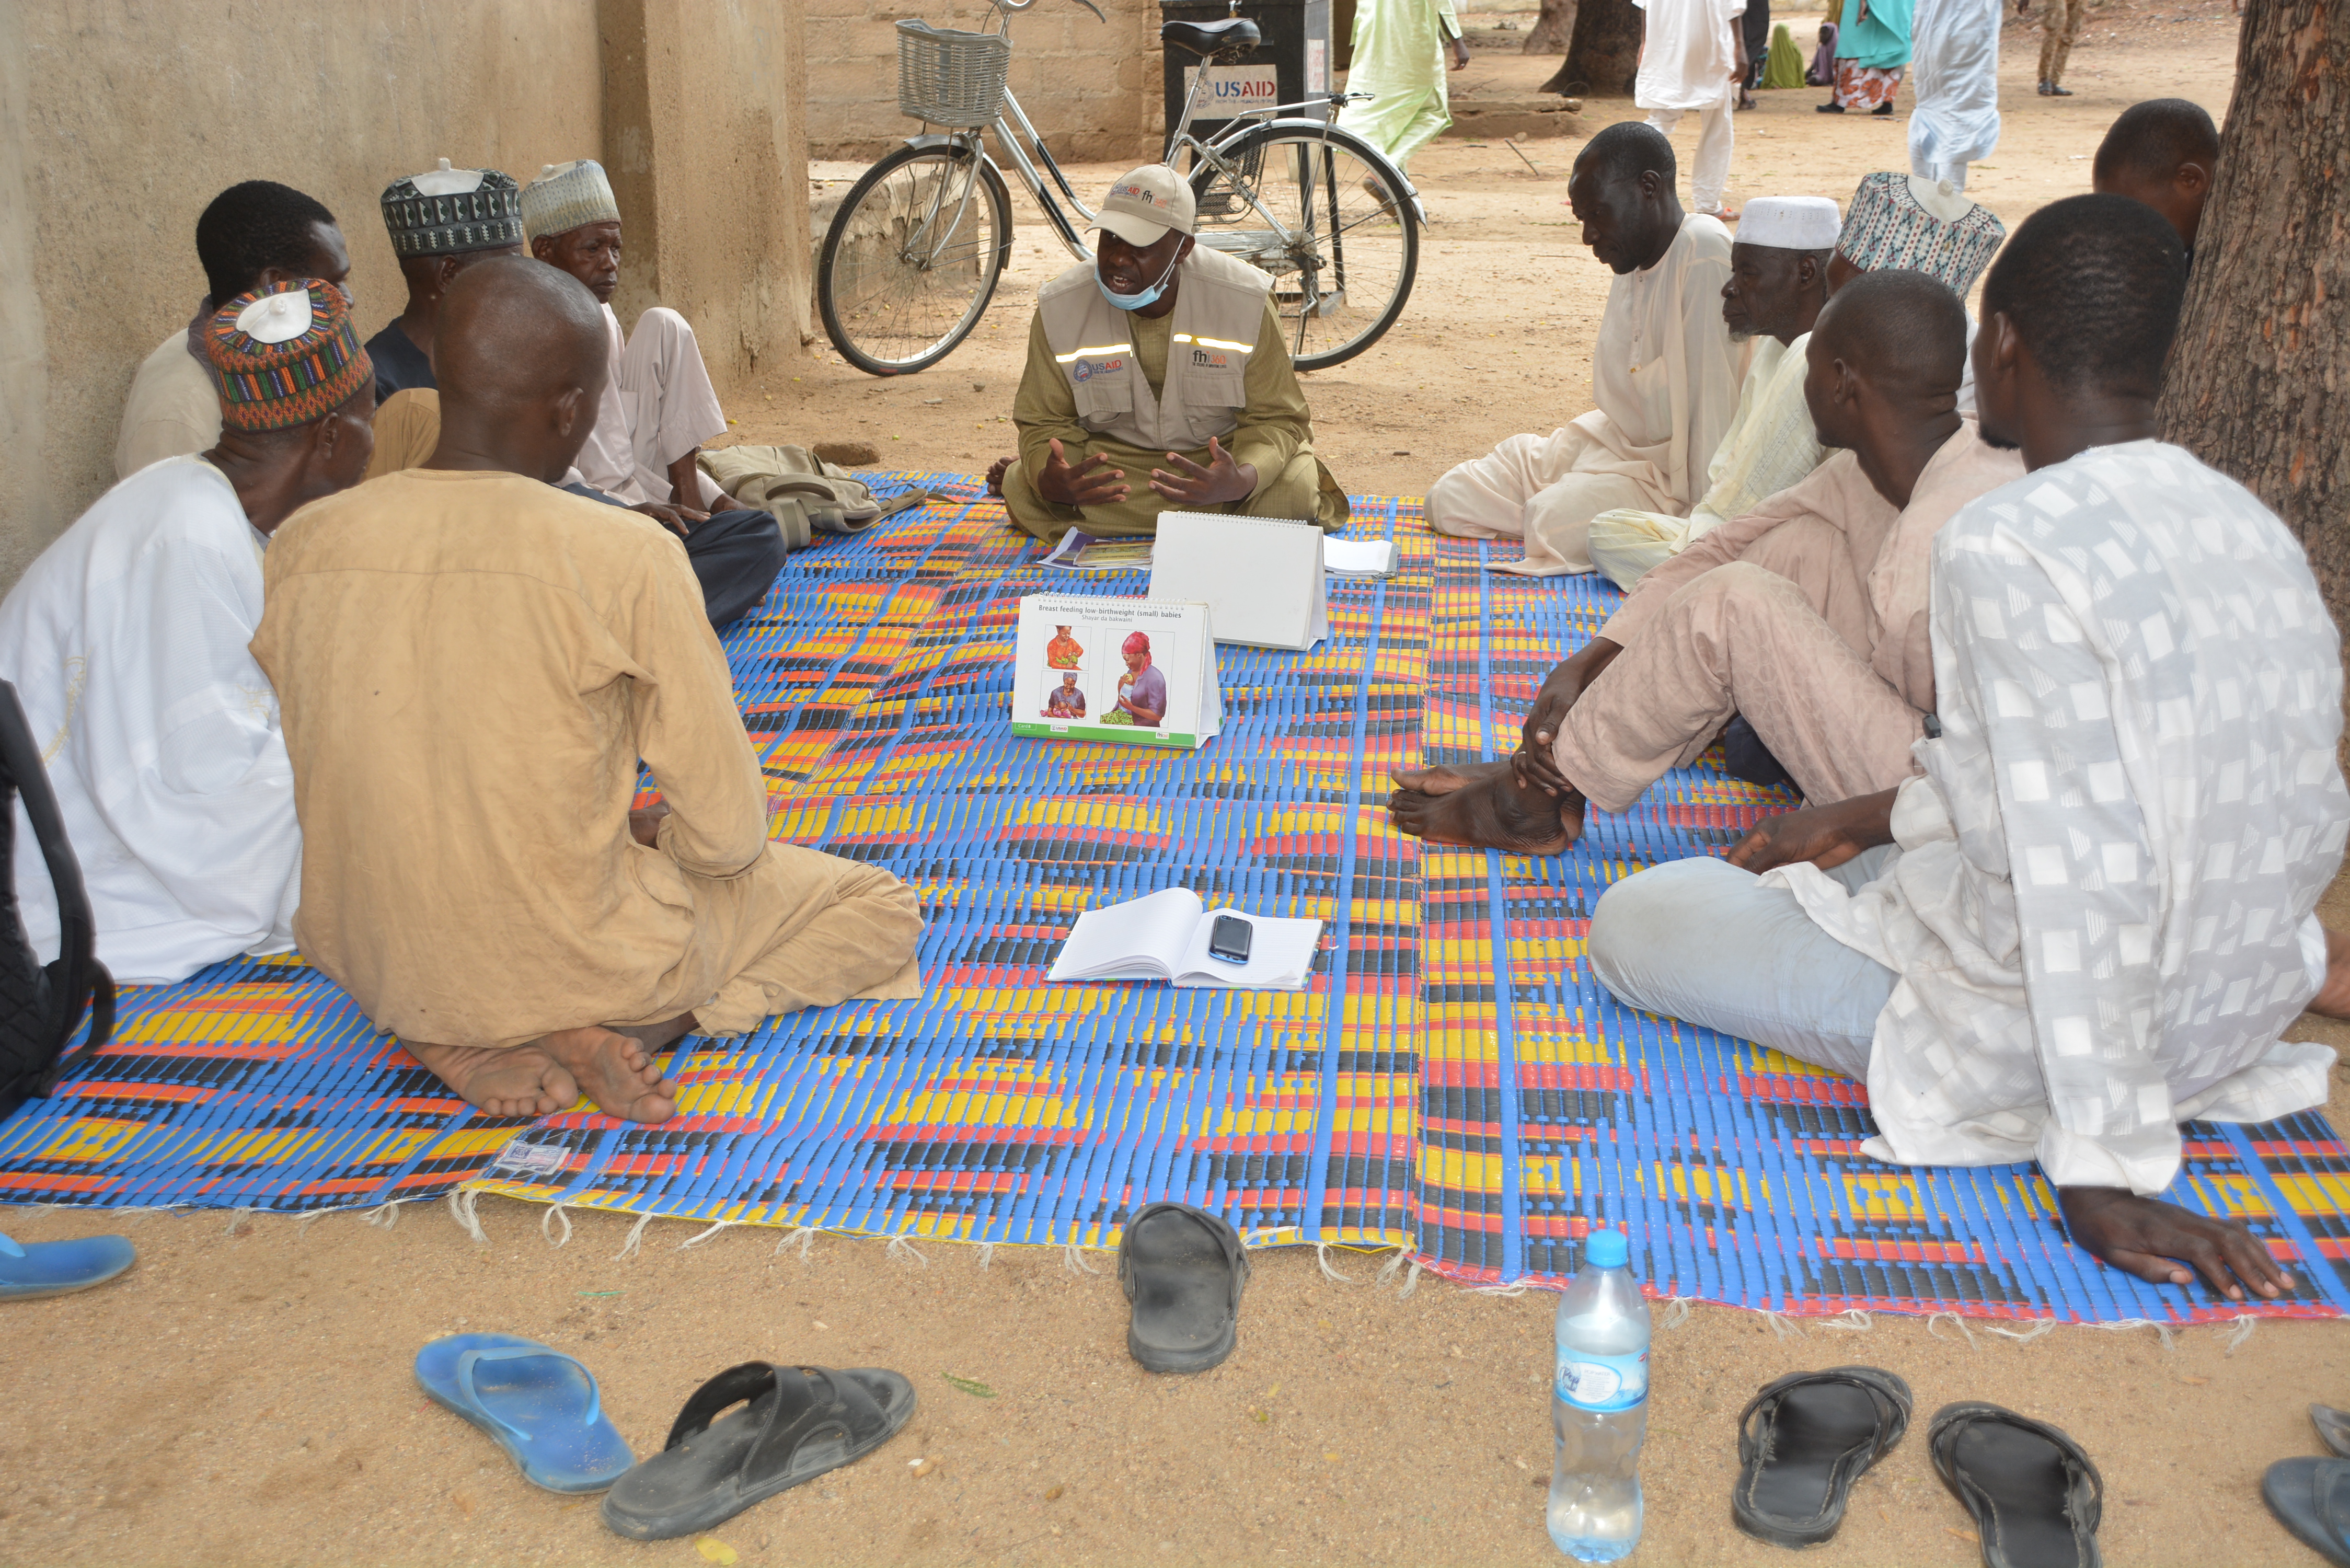 men in a group listening to man speaking using training cards